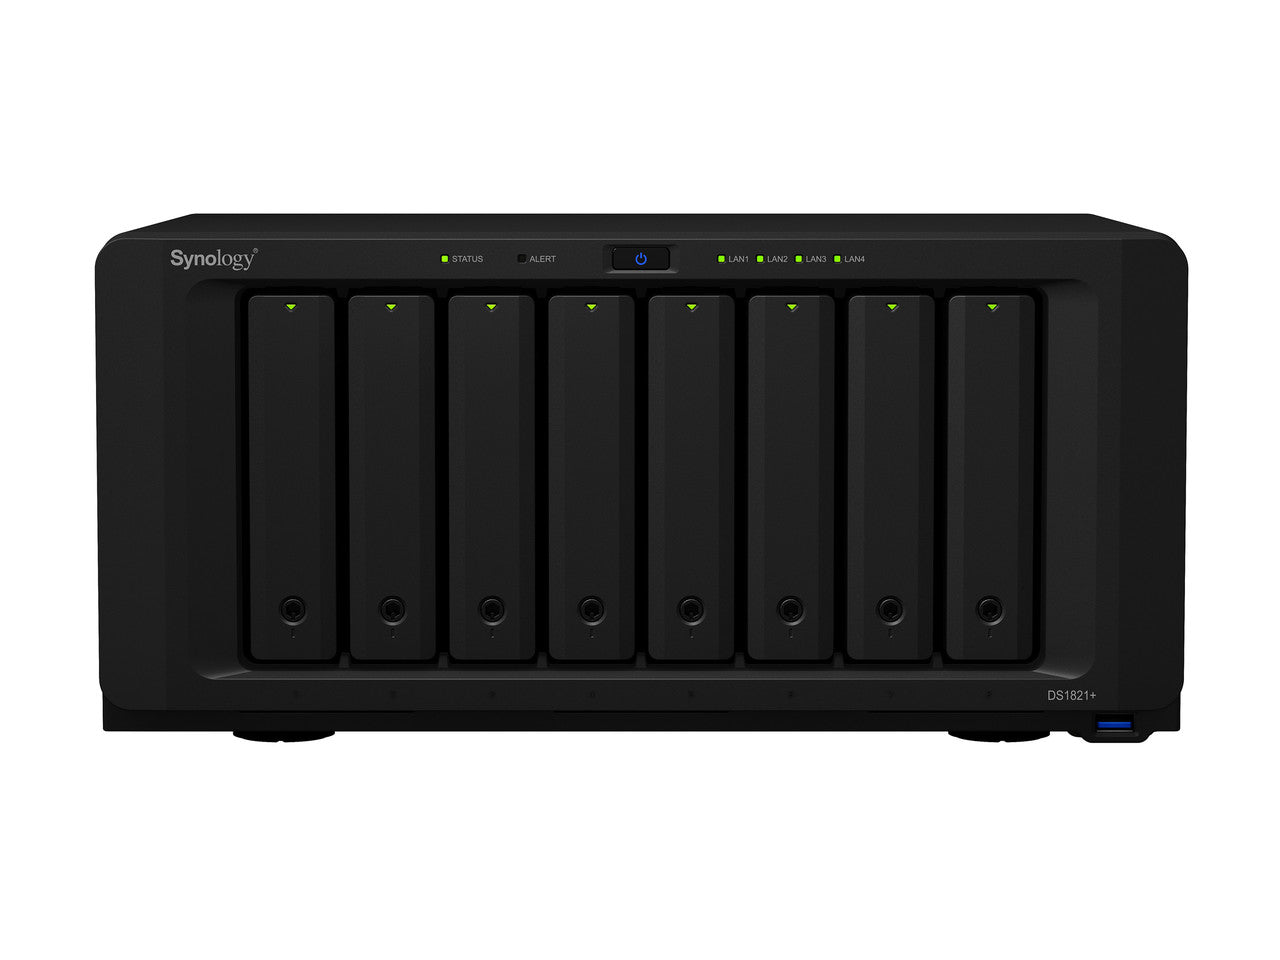 Synology DS1821+ 8-BAY DiskStation with 16GB Synology RAM and 96TB (8x12TB) Synology Enterprise HAT5300 Drives Fully Assembled and Tested